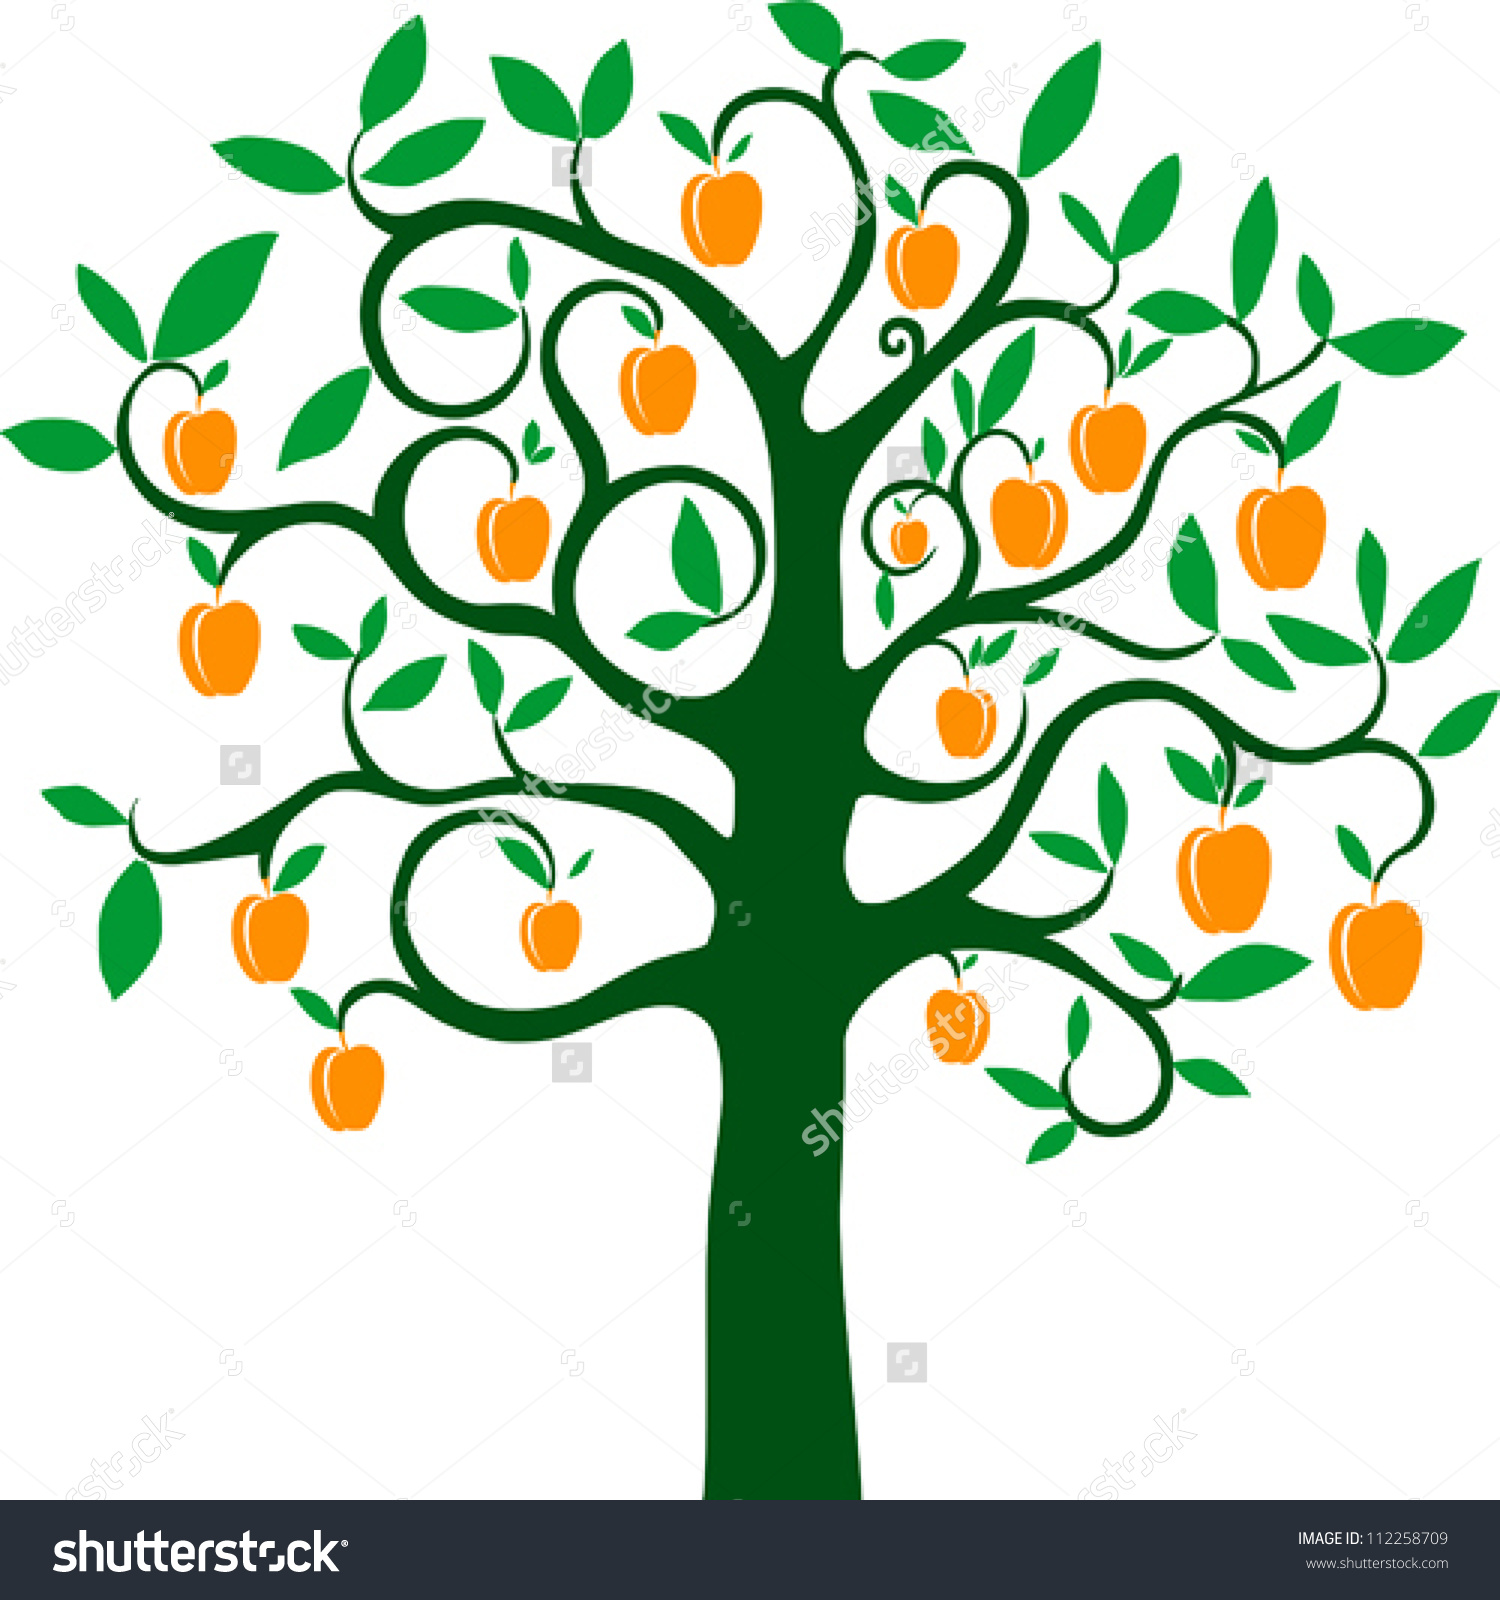 Clipart of apricot tree.